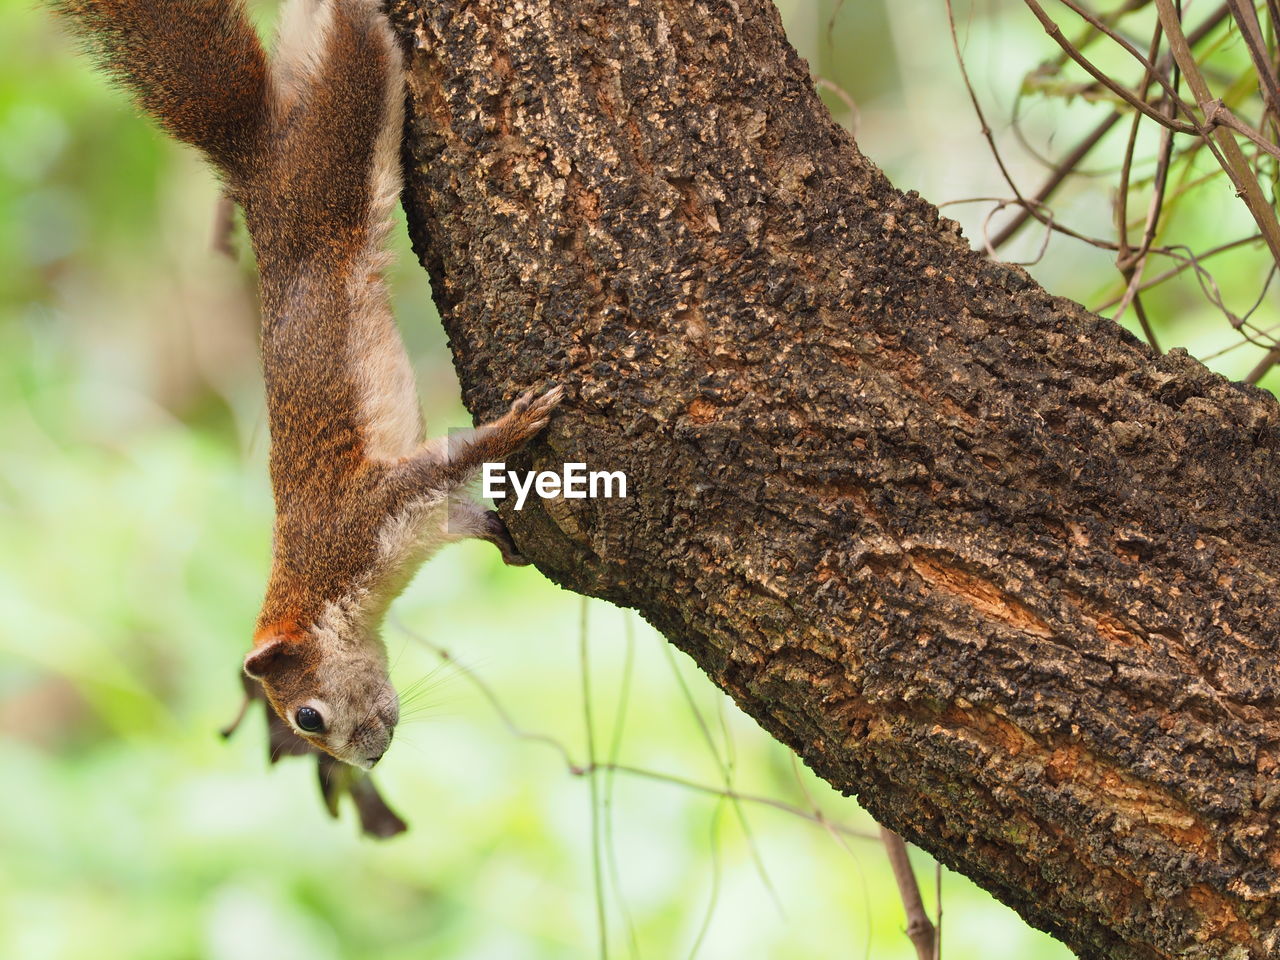 CLOSE-UP OF SQUIRREL ON TREE BRANCH